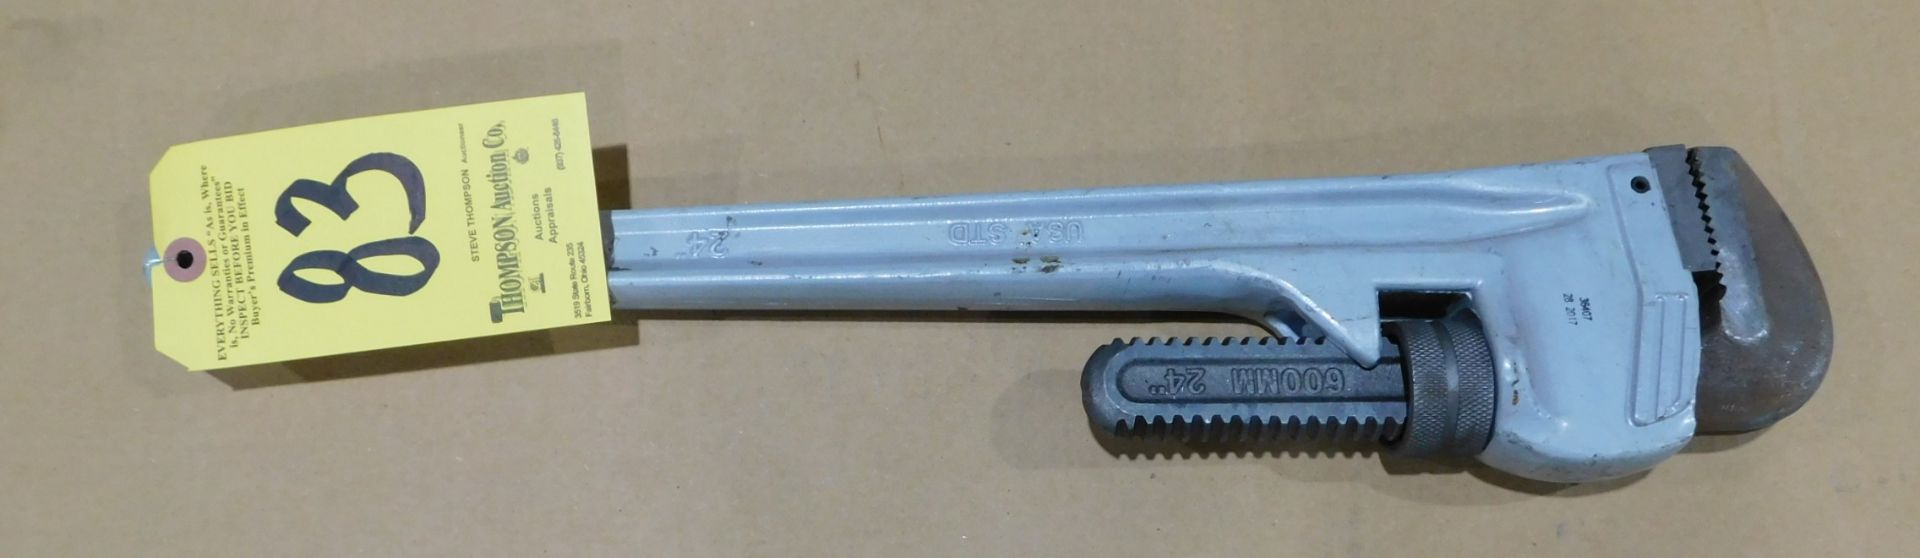 USA STD PW24 24" Aluminum Pipe Wrench